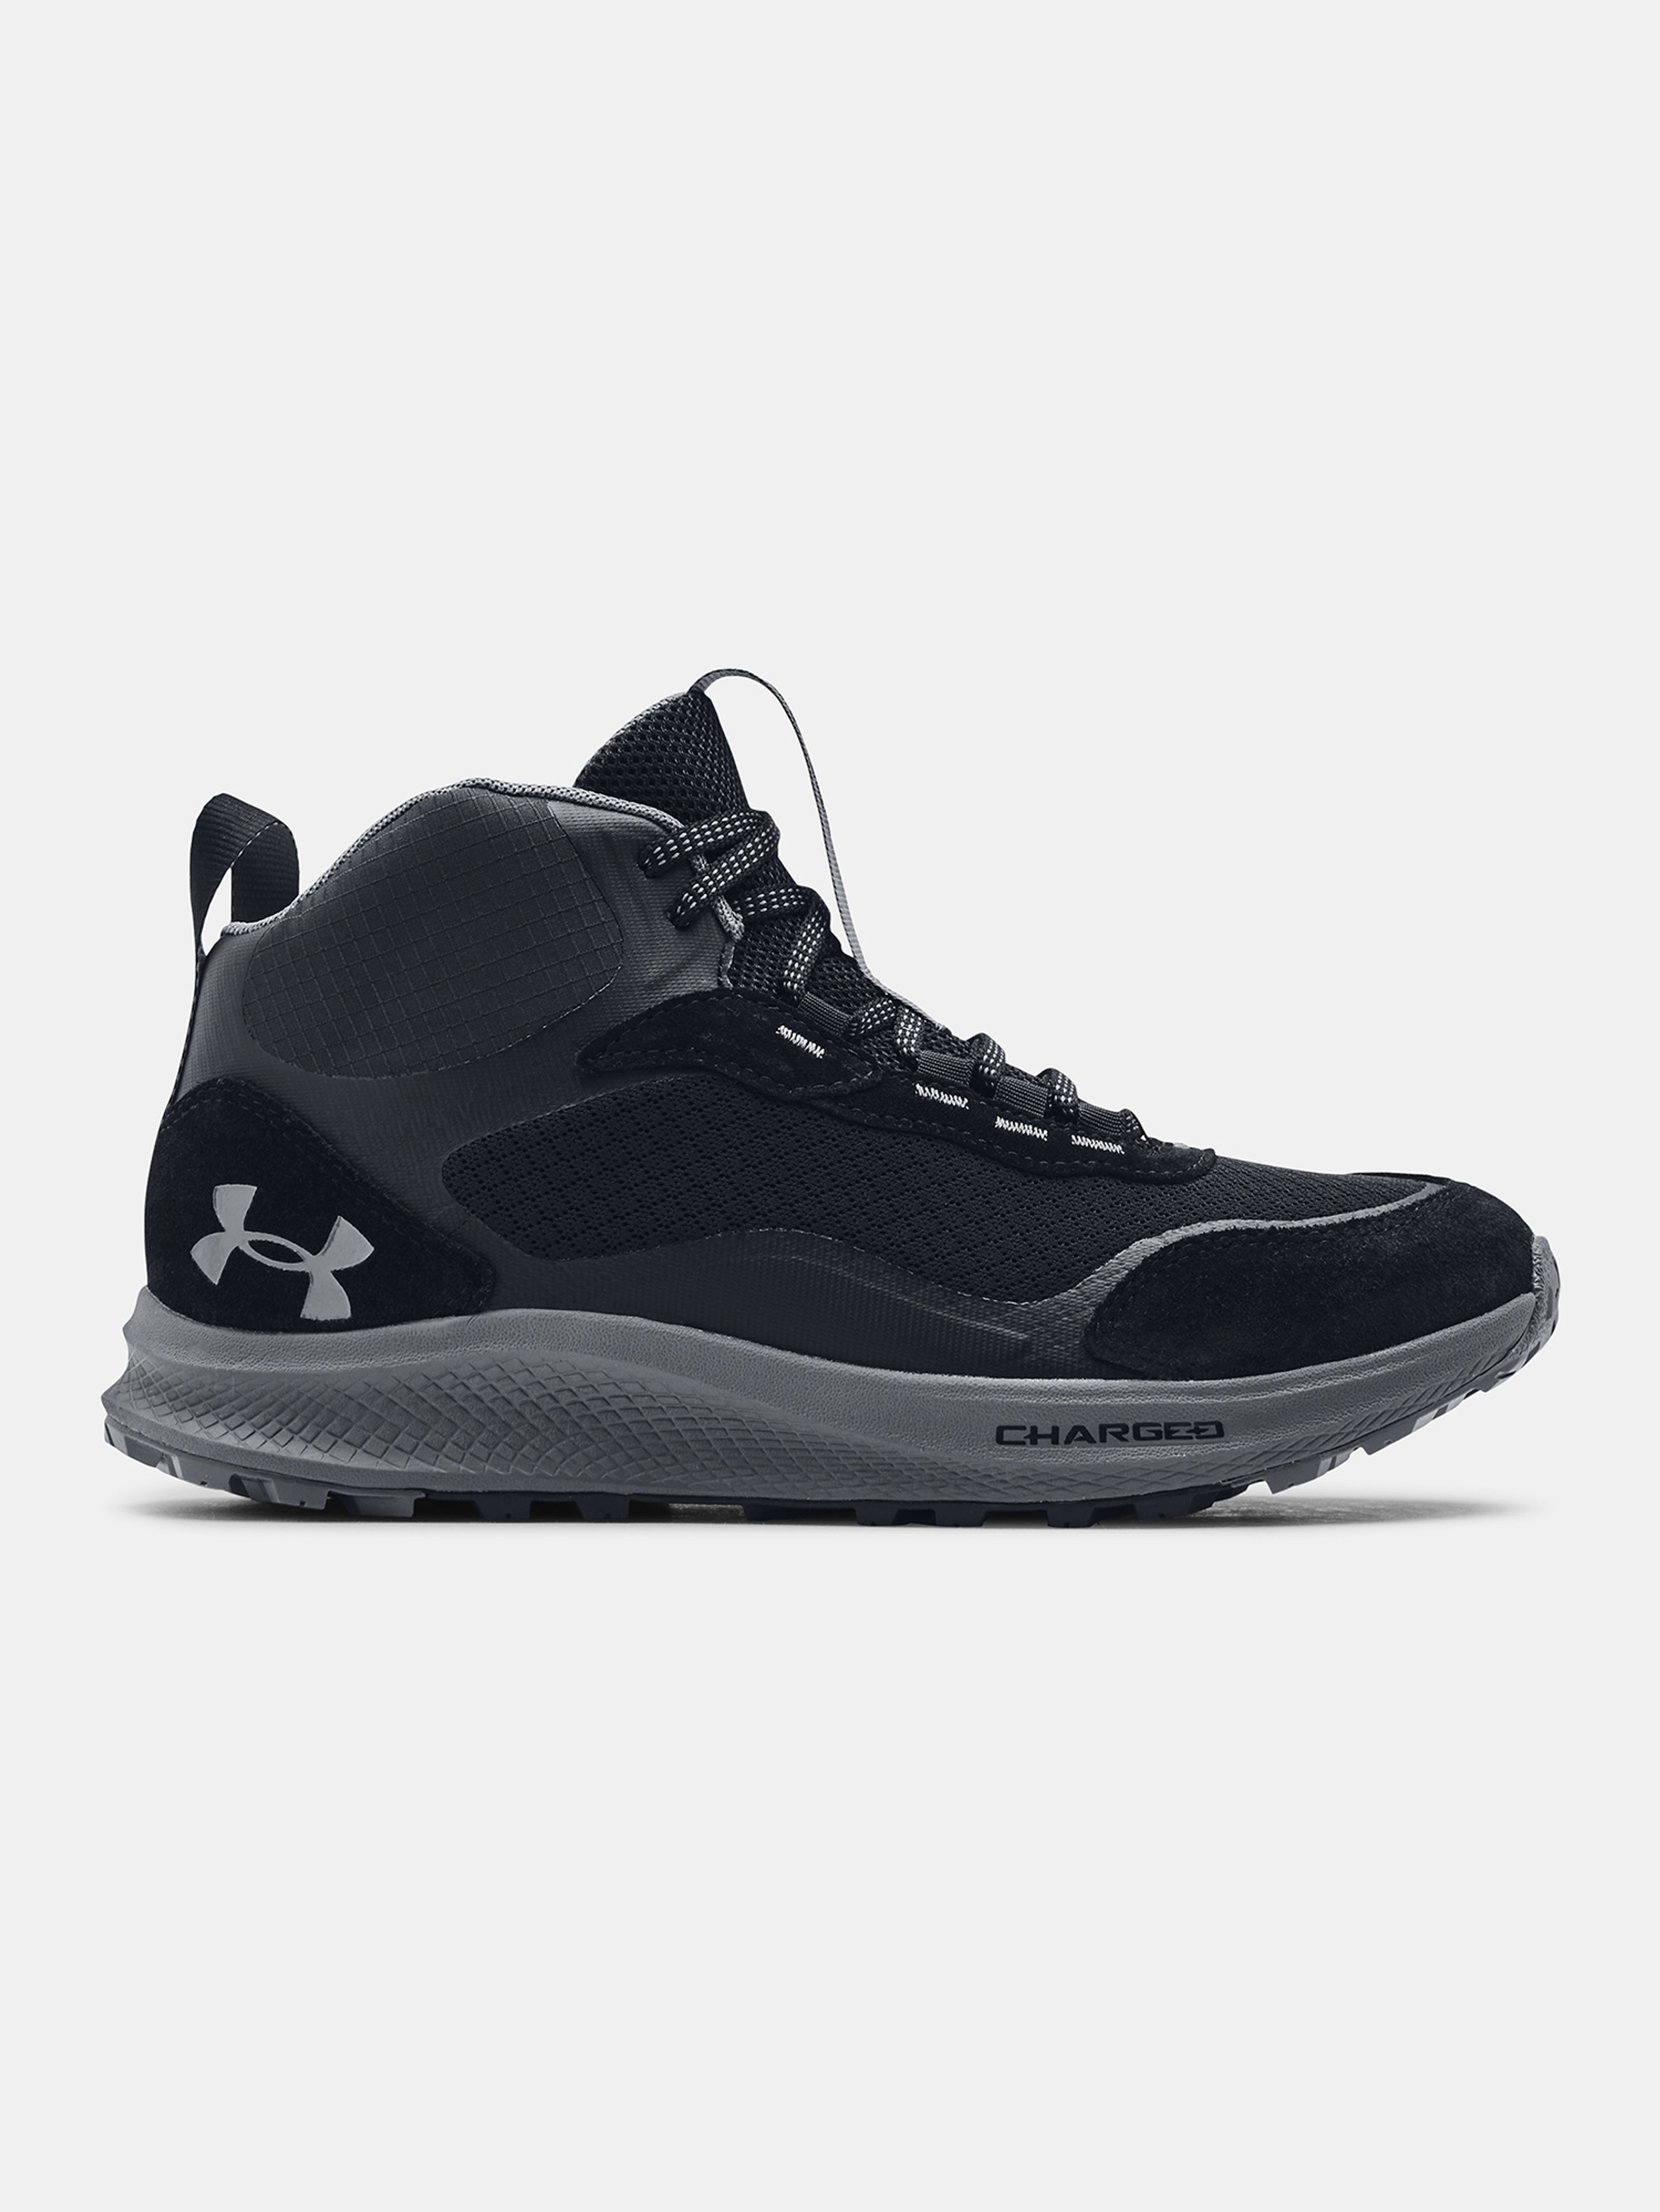 Boty Under Armour UA Charged Bandit Trek 2-BLK